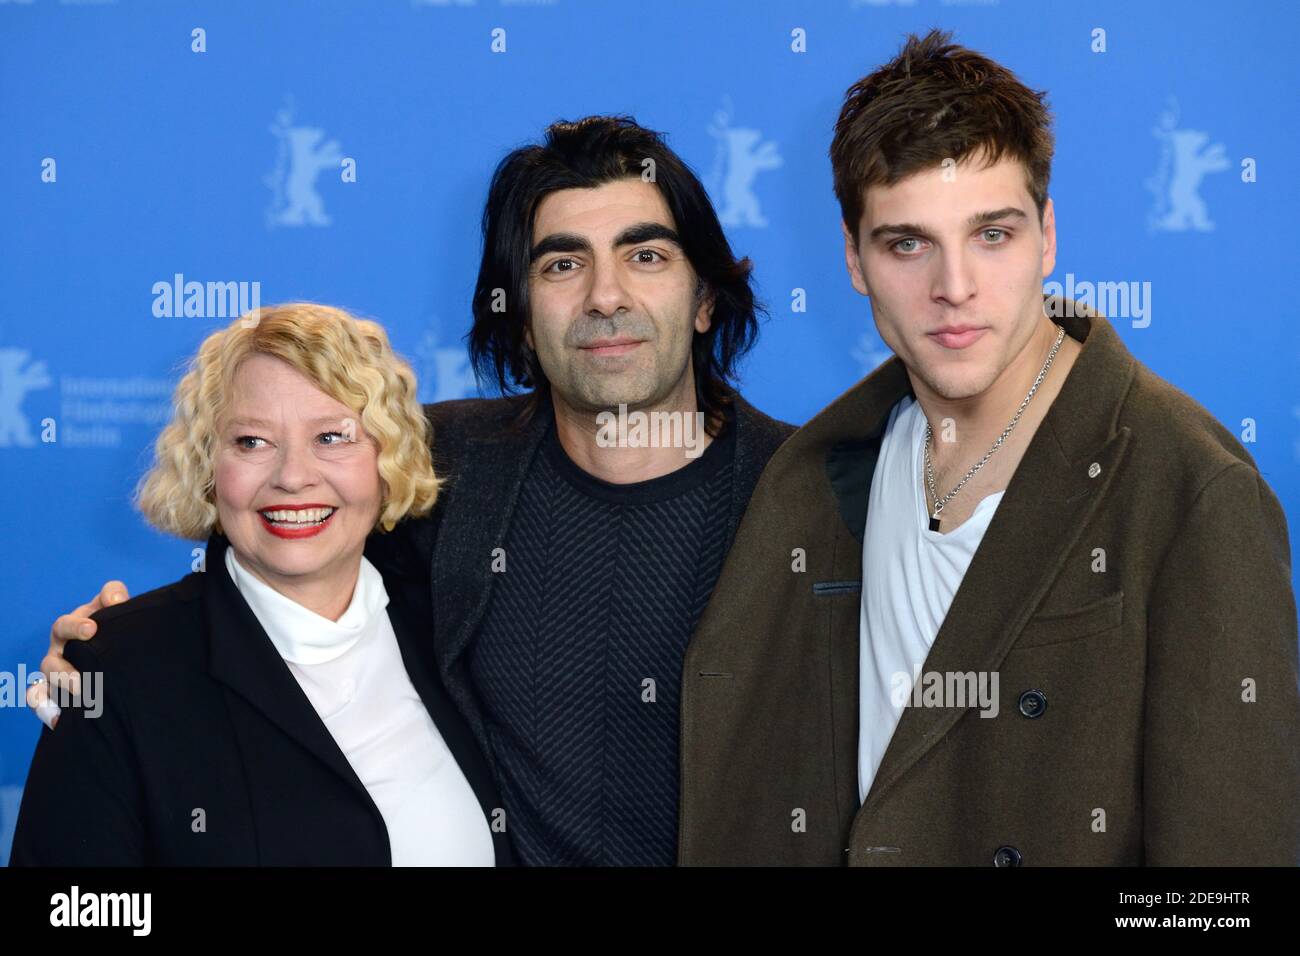 Margarethe Tiesel, Fatih Akin and Jonas Dassler attending The Golden Glove Photocall as part of the 69th Berlin International Film Festival (Berlinale) in Berlin, Germany on February 09, 2019. Photo by Aurore Marechal/ABACAPRESS.COM Stock Photo